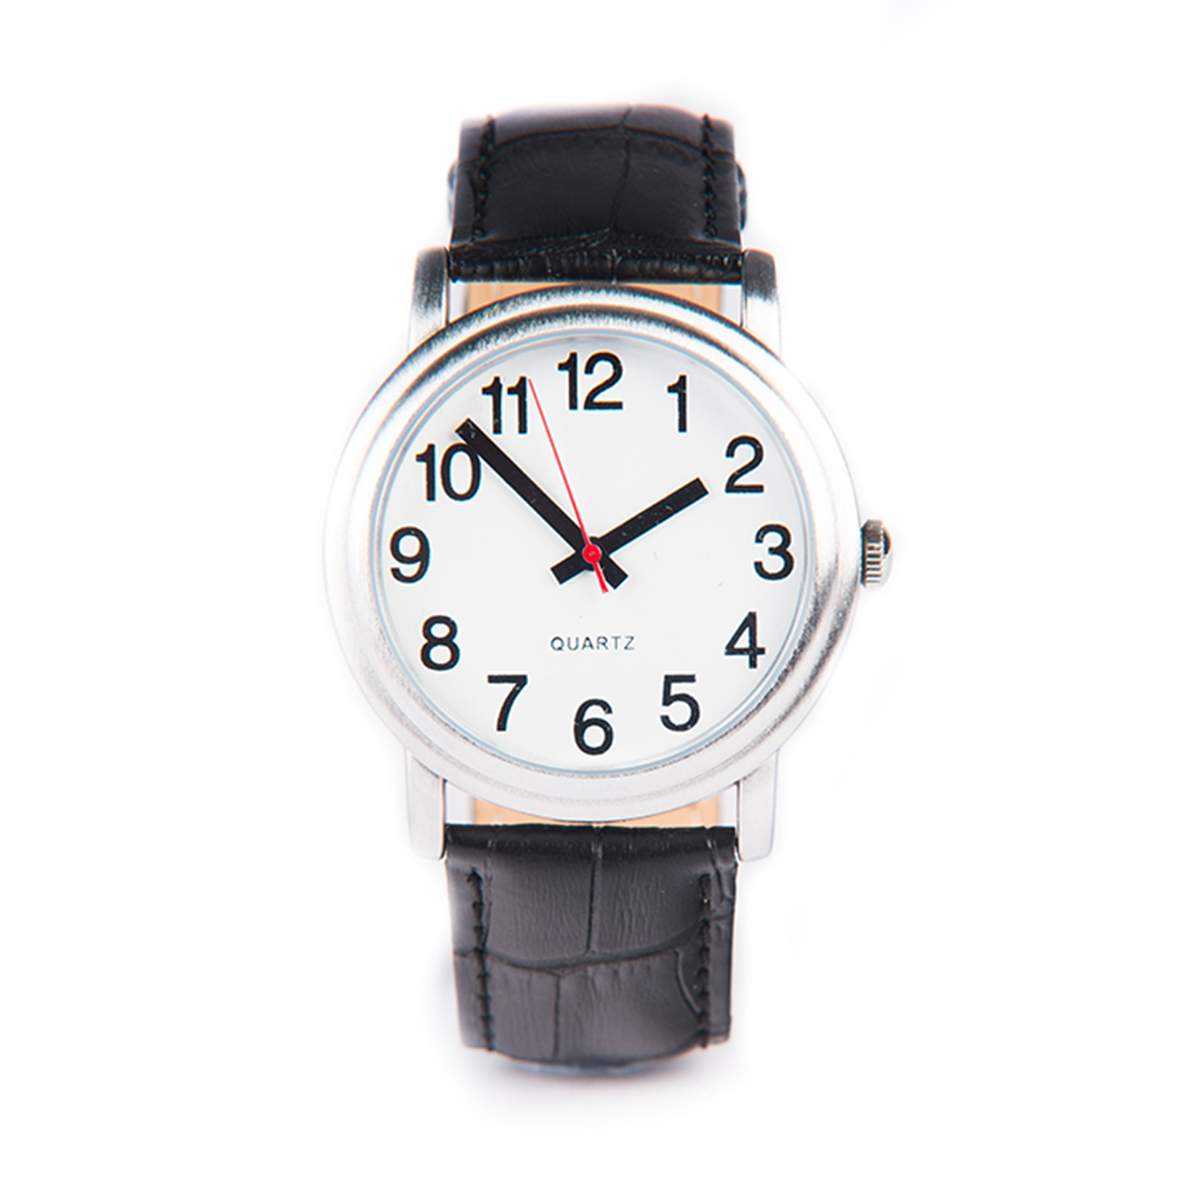 Easy to Read Analogue Watch